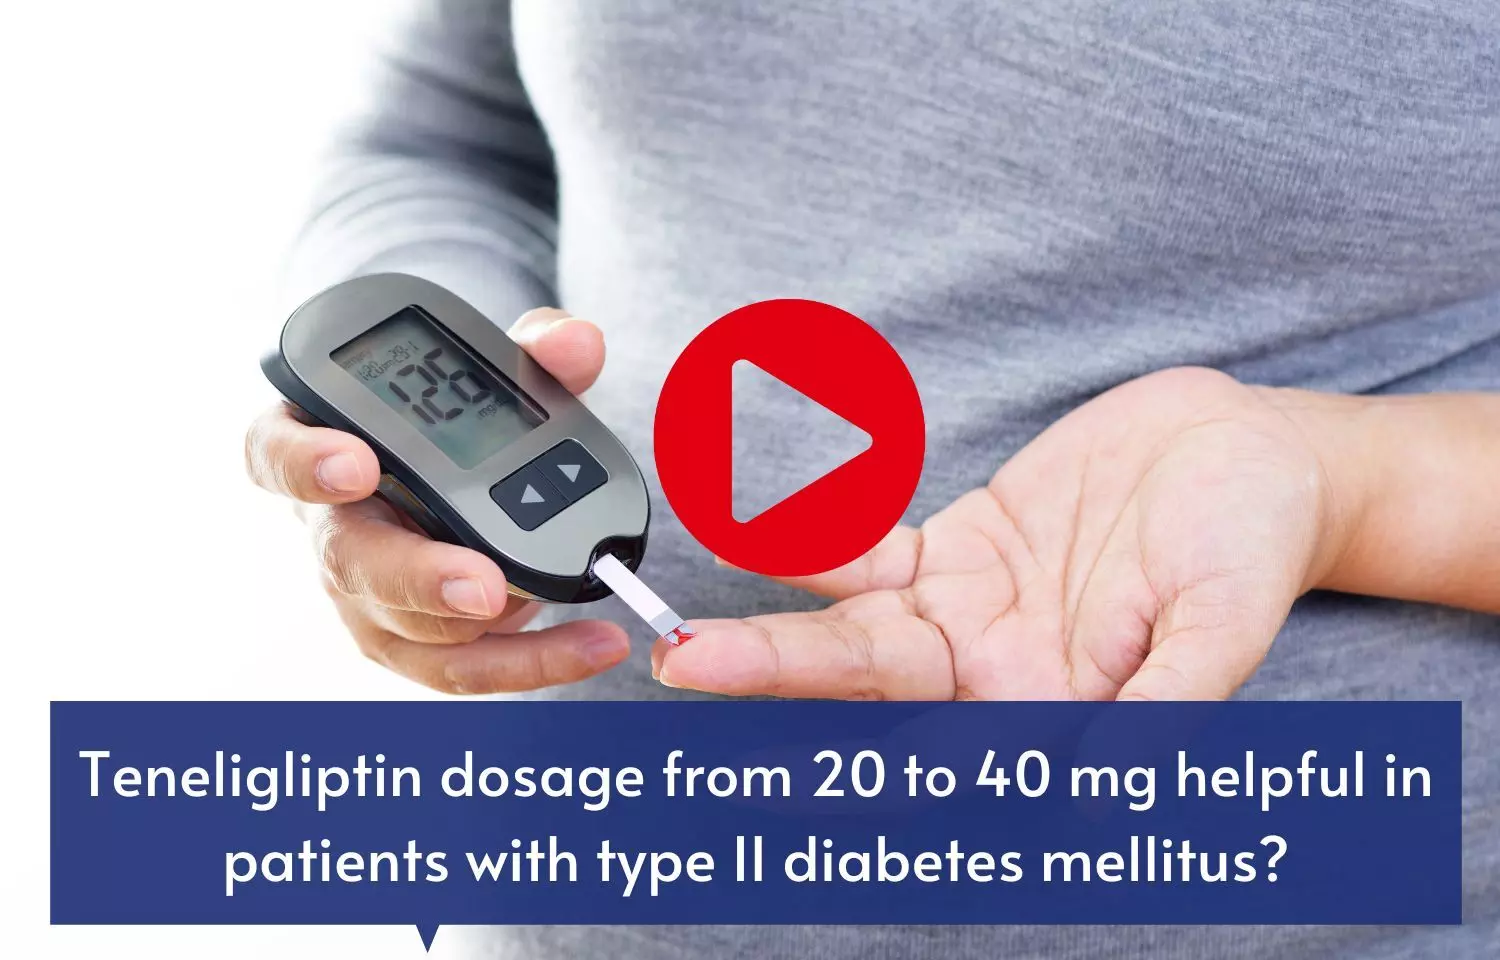 Teneligliptin dosage of 20 to 40 mg helpful in patients with type II diabetes mellitus?